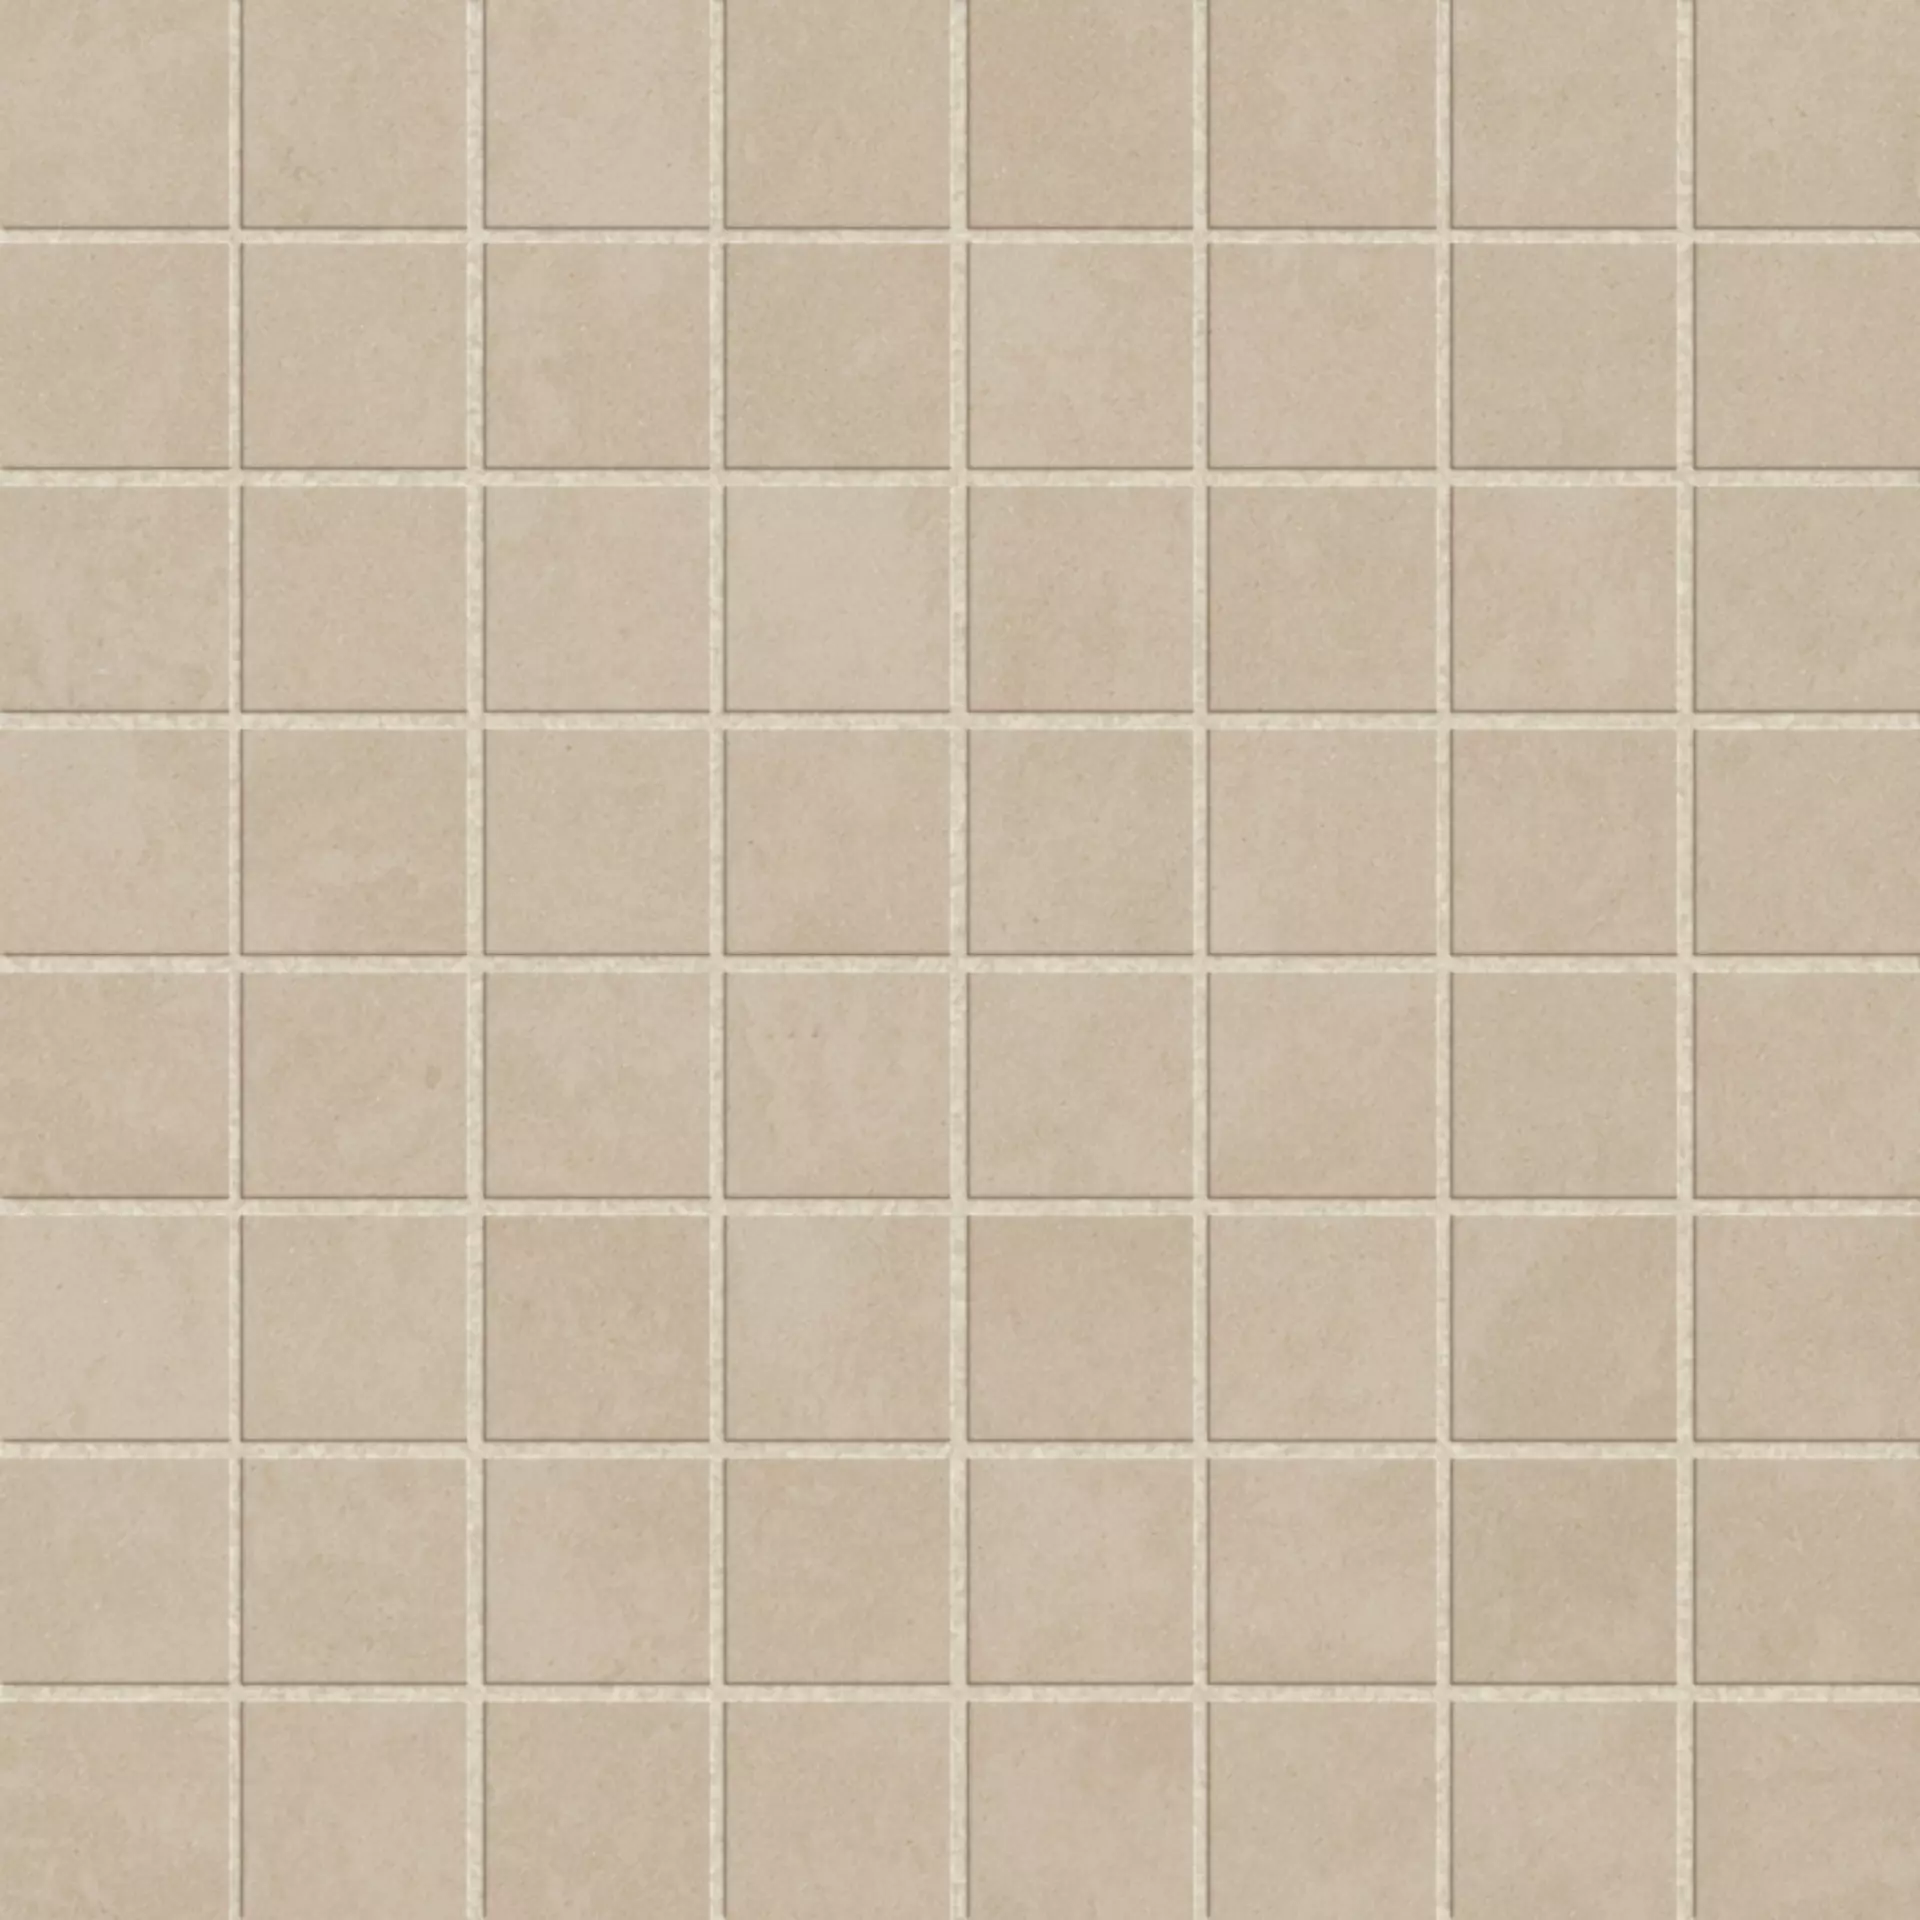 Margres Time 2.0 Cream Polished Antibacterial Mosaic 3,5x3,5 B25M33T236F 30x30cm rectified 10,5mm